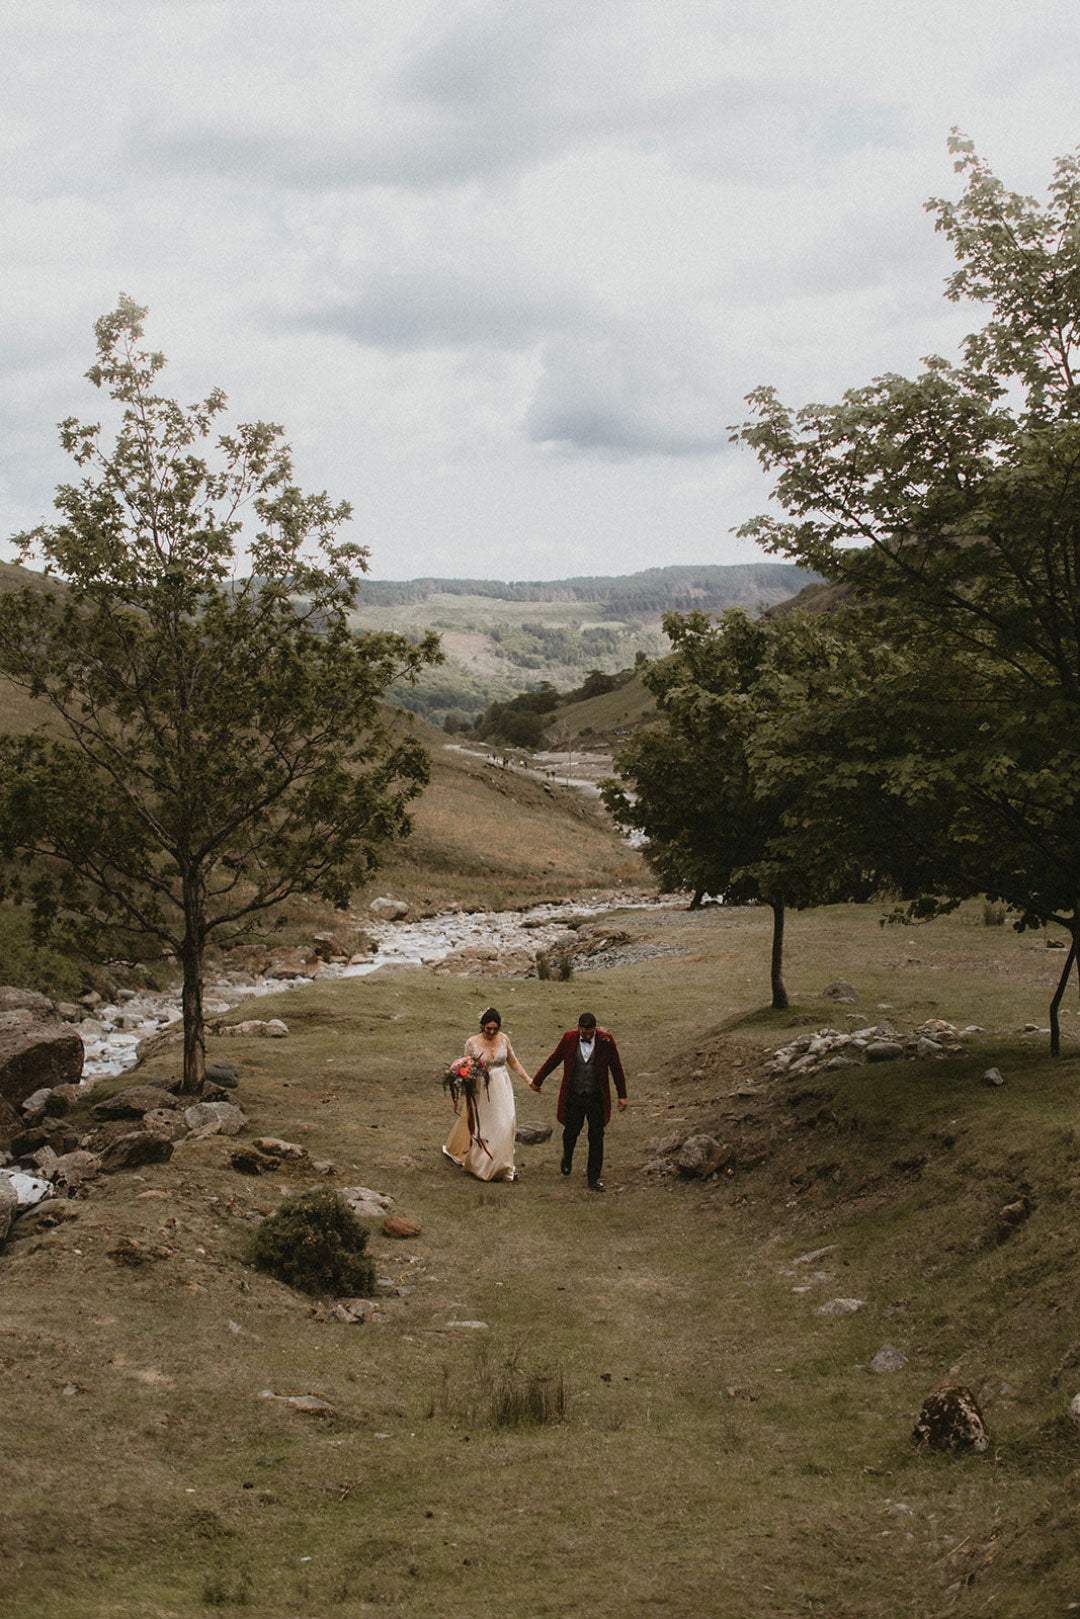 Bride and Groom walking in country landscape